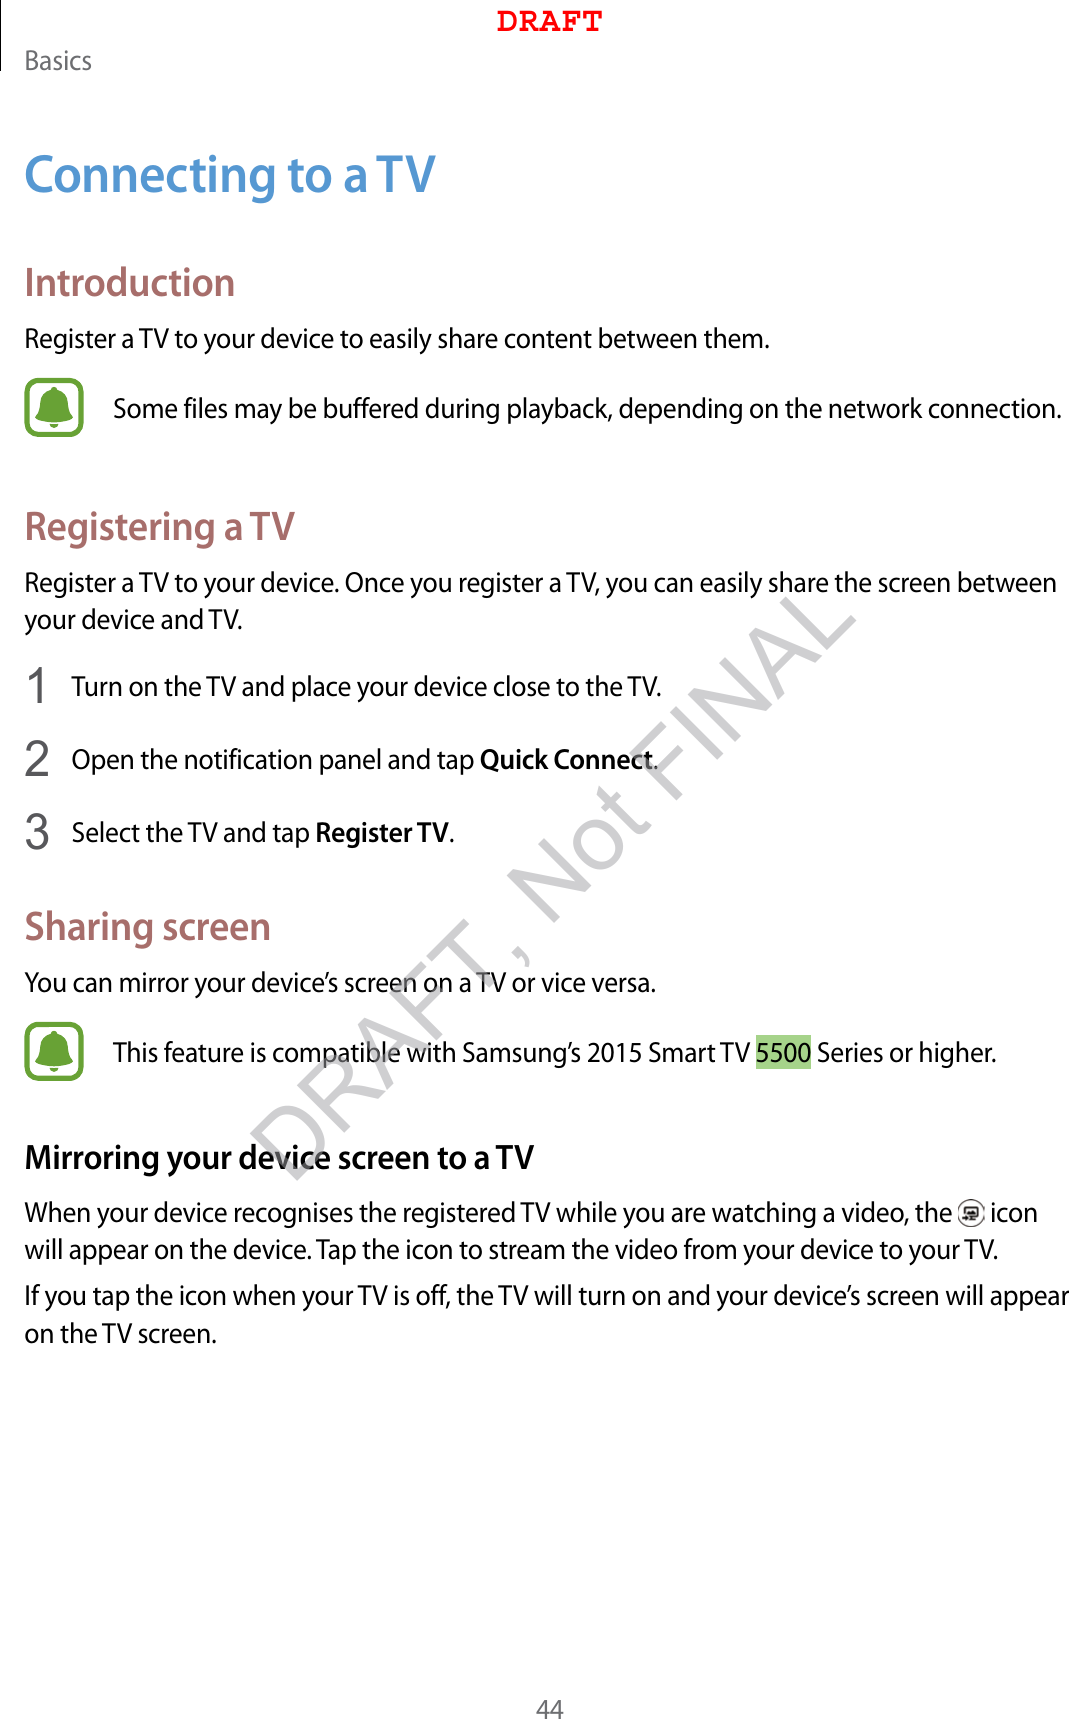 Basics44Connecting to a TVIntroductionRegister a TV to your device to easily share content between them.Some files may be buffered during playback, depending on the network connection.Registering a TVRegister a TV to your device. Once you register a TV, you can easily share the screen between your device and TV.1  Turn on the TV and place your device close to the TV.2  Open the notification panel and tap Quick Connect.3  Select the TV and tap Register TV.Sharing screenYou can mirror your device’s screen on a TV or vice versa.This feature is compatible with Samsung’s 2015 Smart TV 5500 Series or higher.Mirroring your device screen to a TVWhen your device recognises the registered TV while you are watching a video, the   icon will appear on the device. Tap the icon to stream the video from your device to your TV.If you tap the icon when your TV is off, the TV will turn on and your device’s screen will appear on the TV screen.DRAFTDRAFT, Not FINAL